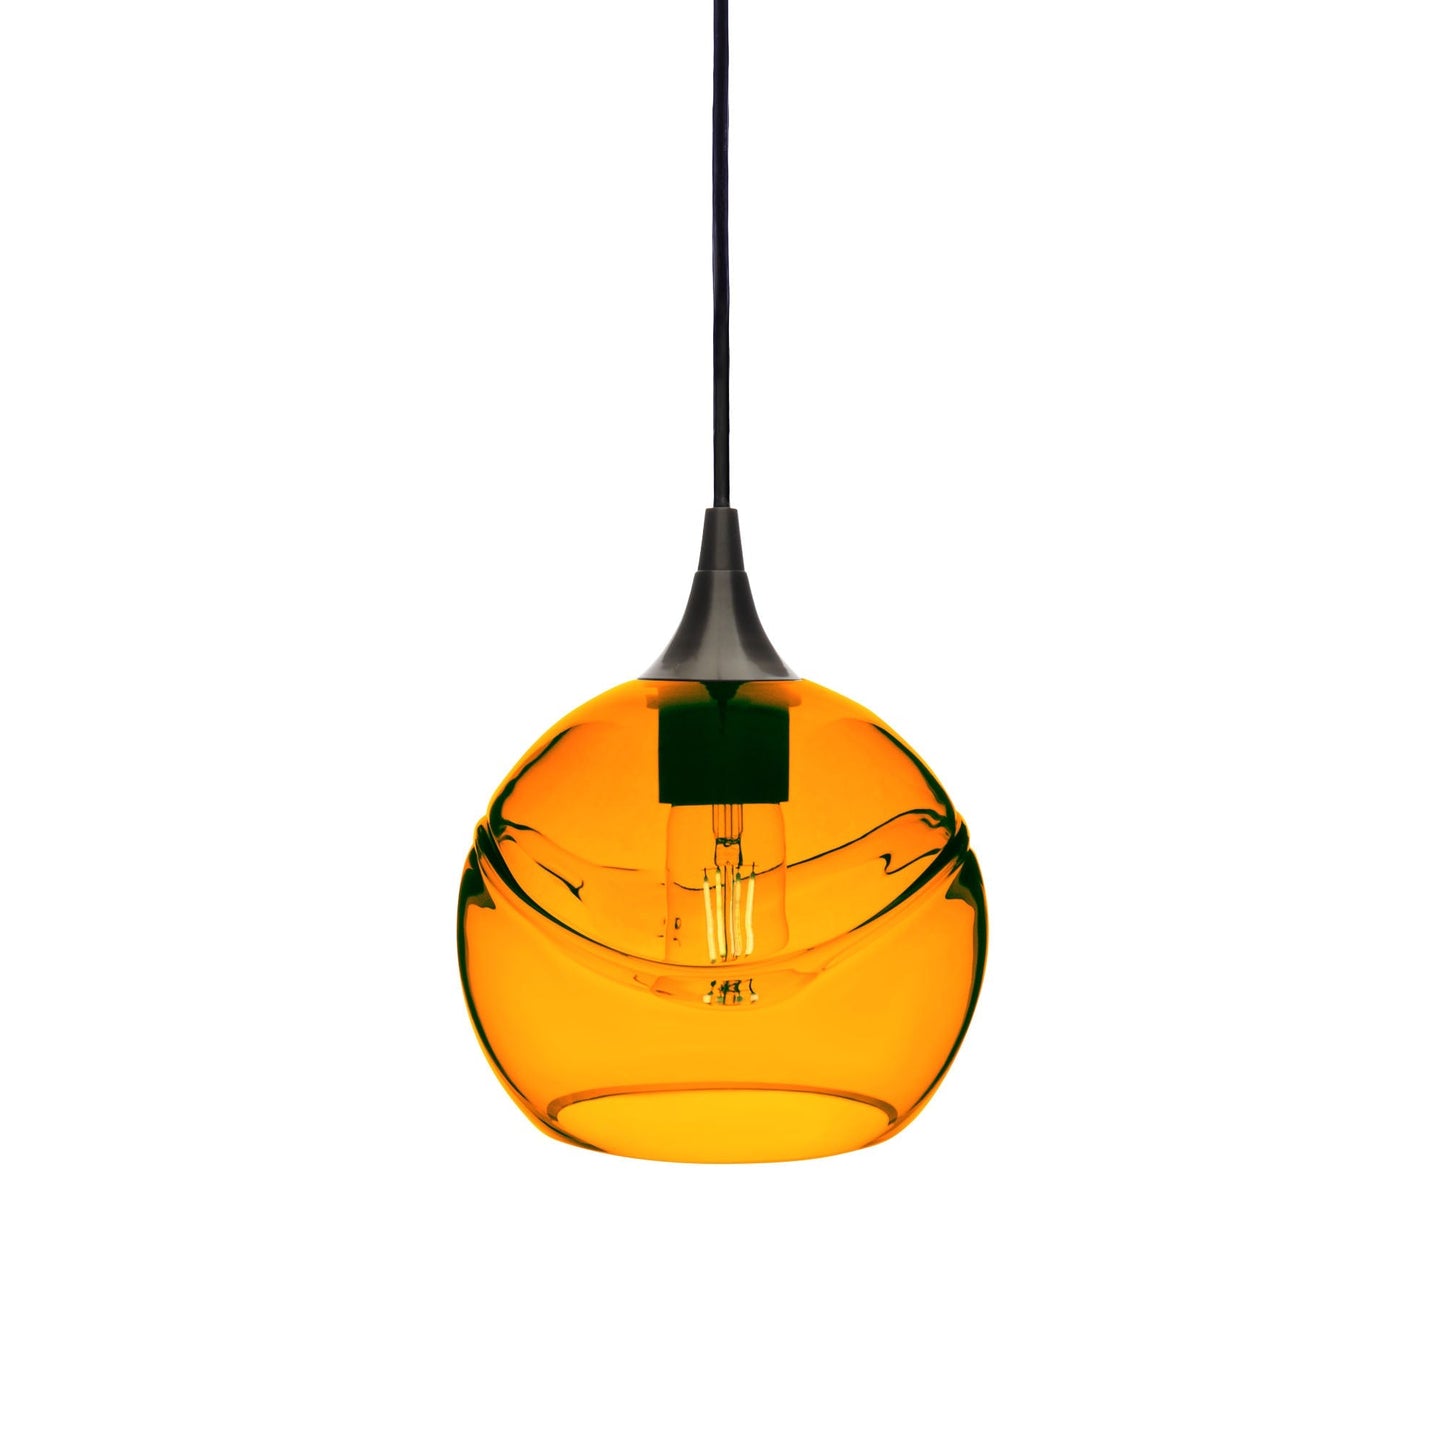 767 Swell: Single Pendant Light-Glass-Bicycle Glass Co - Hotshop-Harvest Gold-Antique Bronze-Bicycle Glass Co